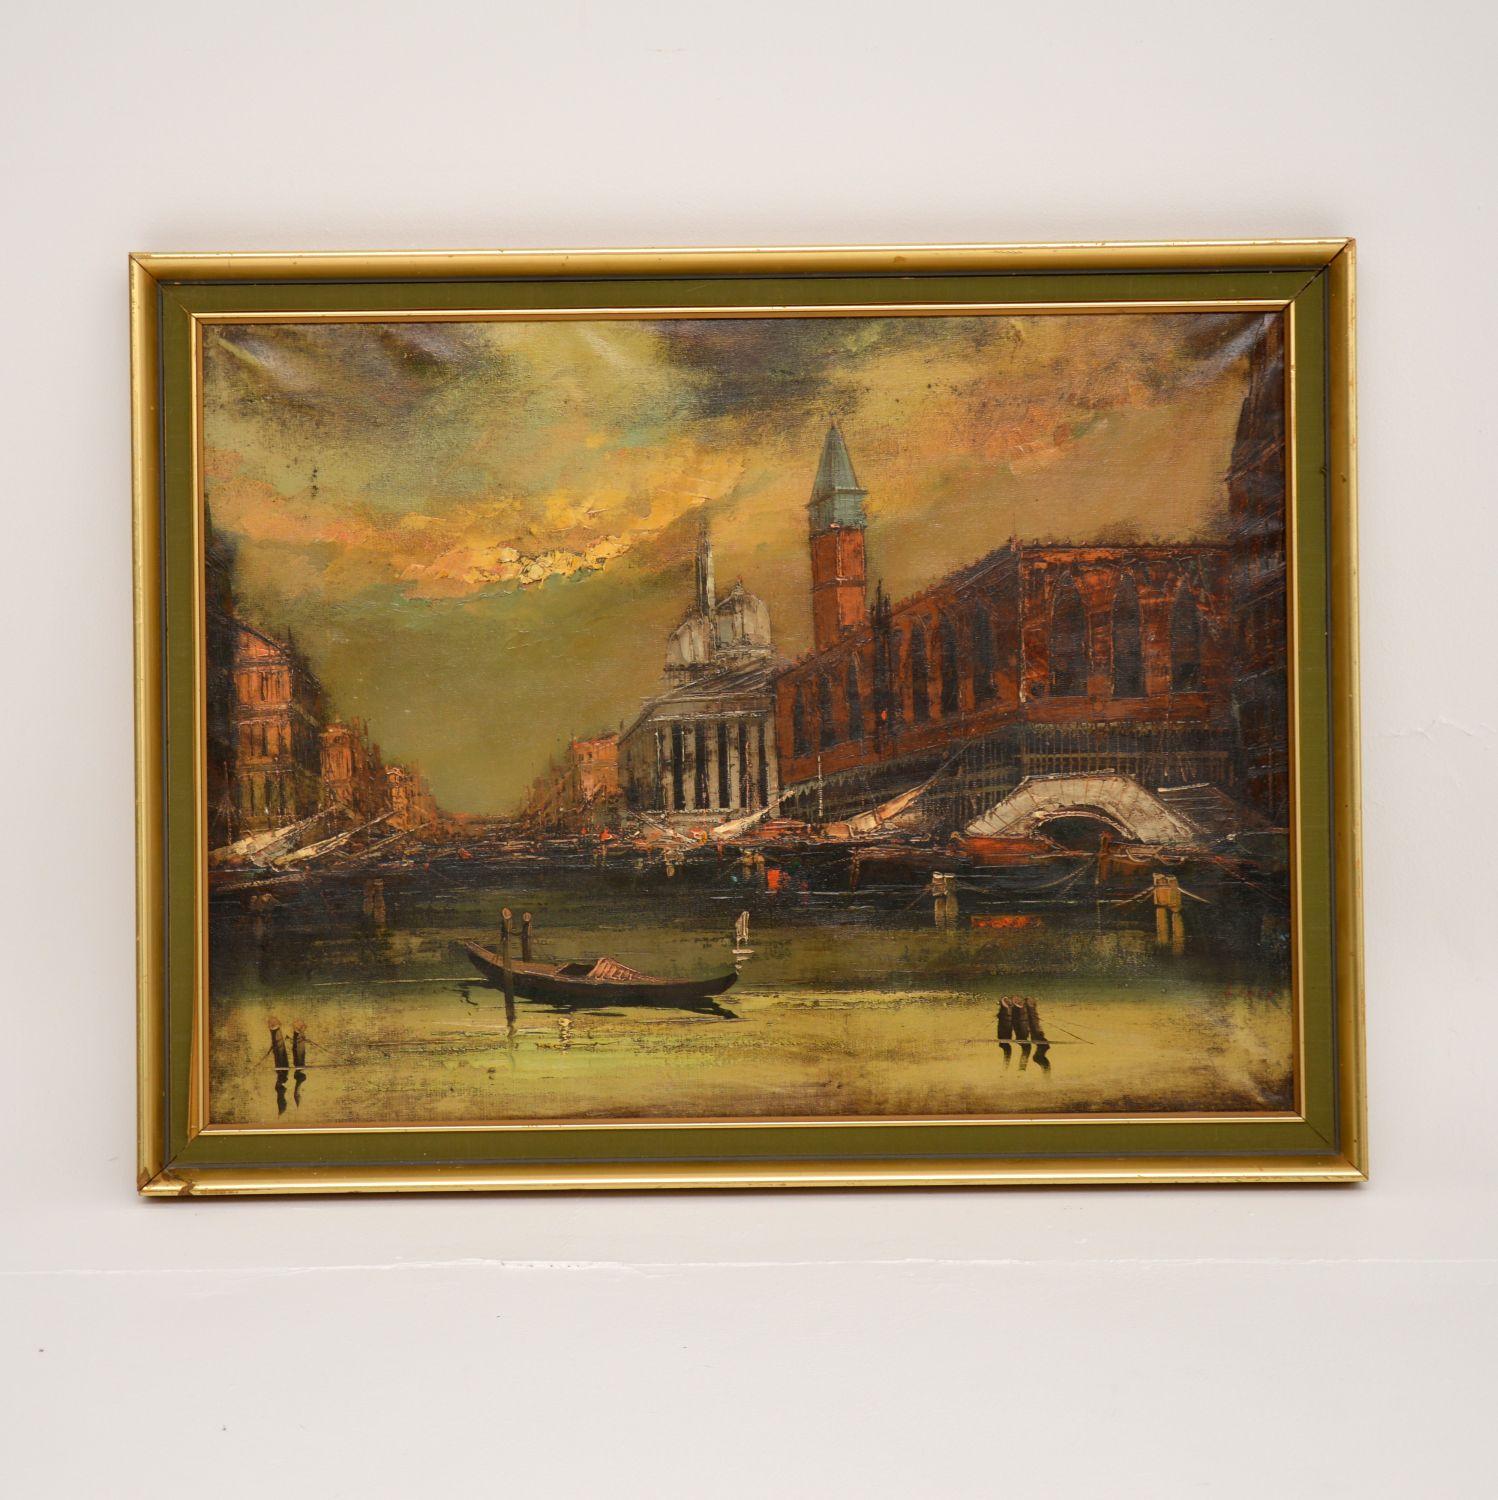 A stunning vintage oil painting depicting a landscape of what I think is Venice. I would date this to around the early-mid twentieth century.

It is beautifully executed and is a lovely size. The colour tones and techniques used are amazing, this